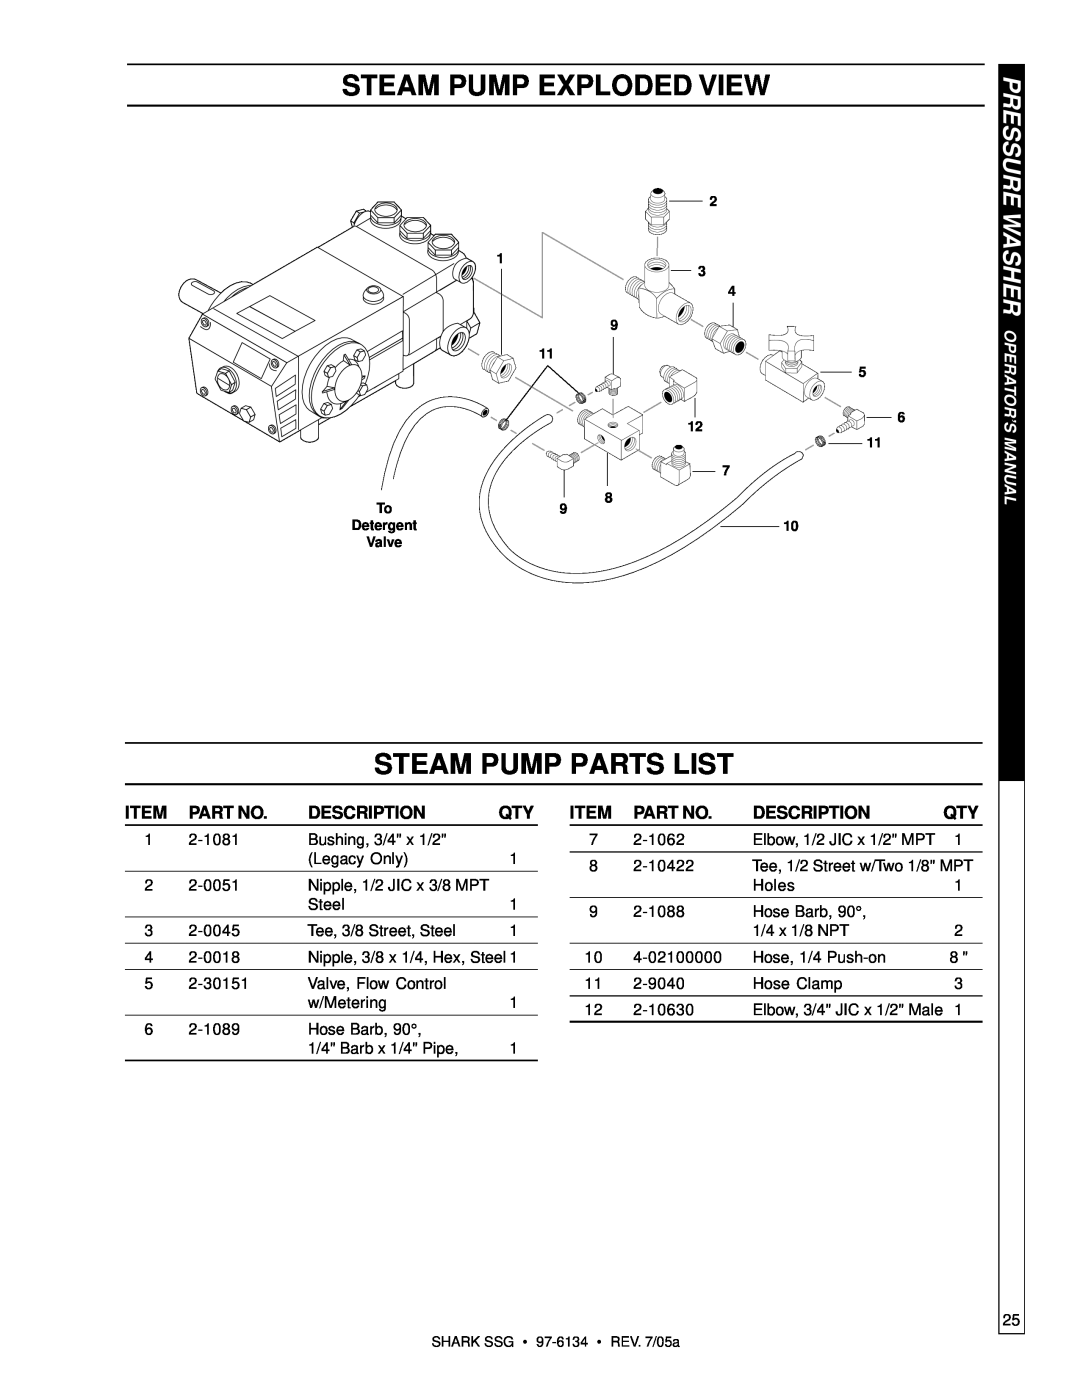 Shark SSG-503027E, SSG-503027G, SSG-503537E, SSG-503537G, SSG-603537E, SSG-603537G manual Steam Pump Exploded View 